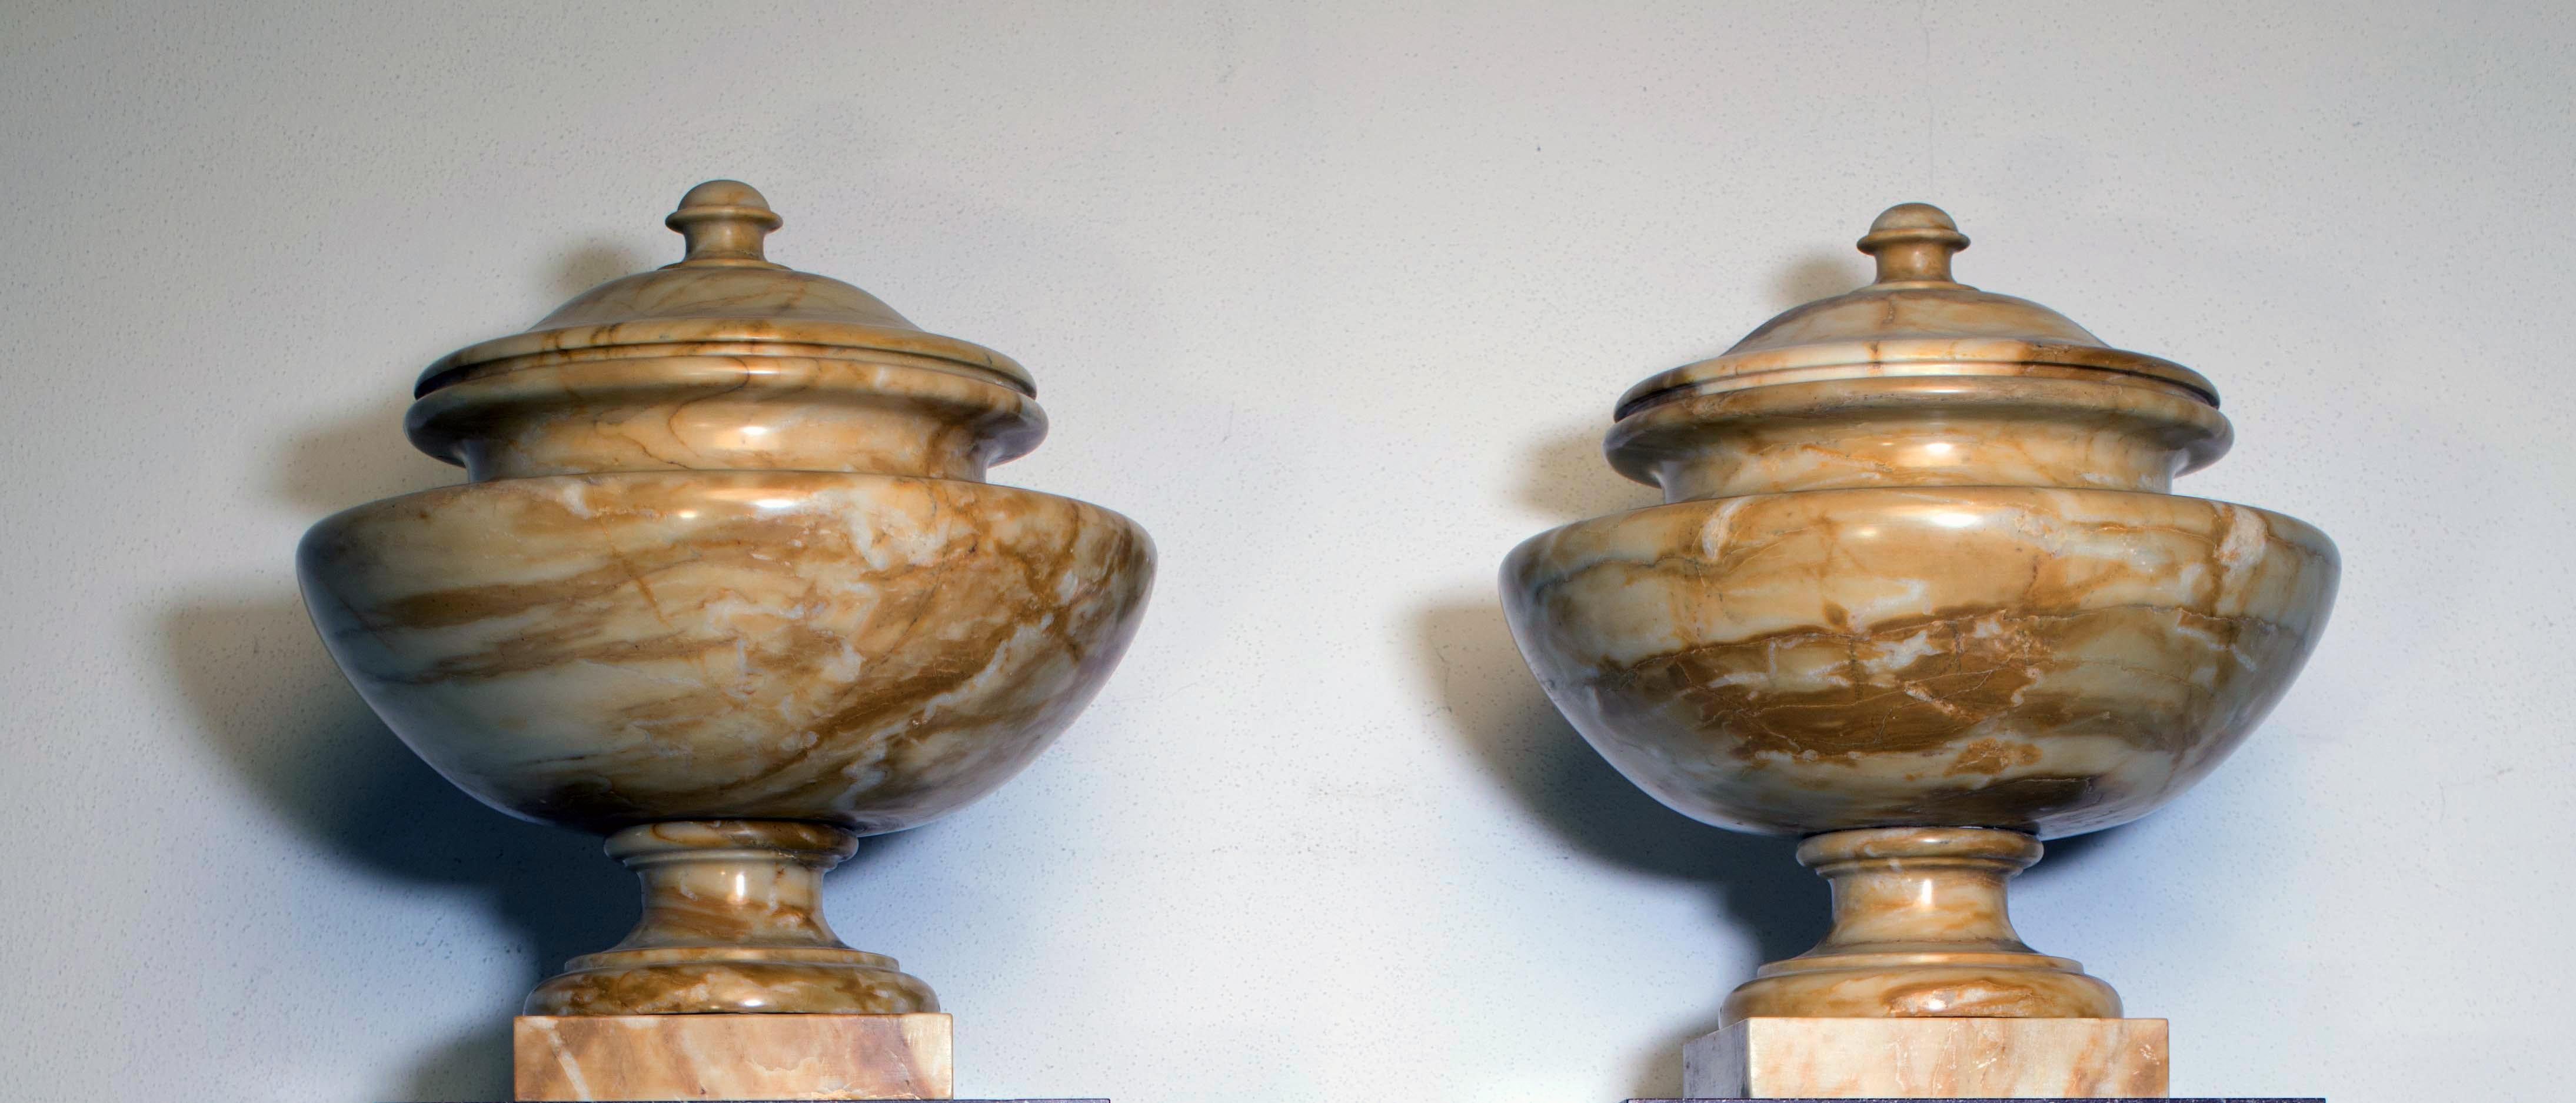 A very impressive pair of urns made in Siena yellow marble, one of the most elegance and precious material used for the luxury and important decorative pieces. Hand-carved directly from the block.